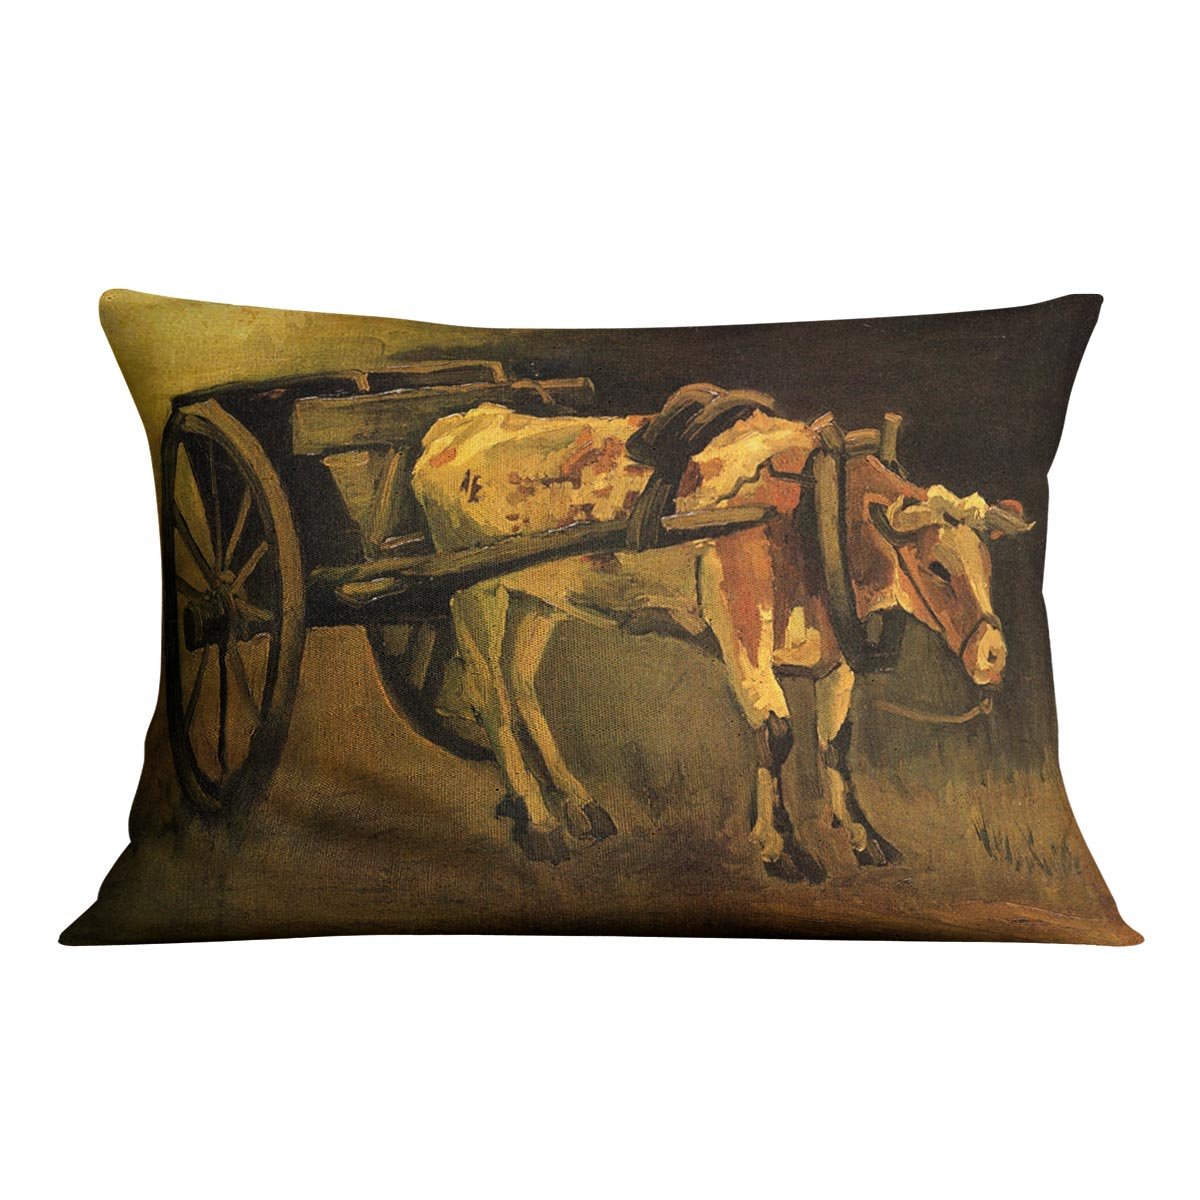 Cart with Red and White Ox by Van Gogh Throw Pillow